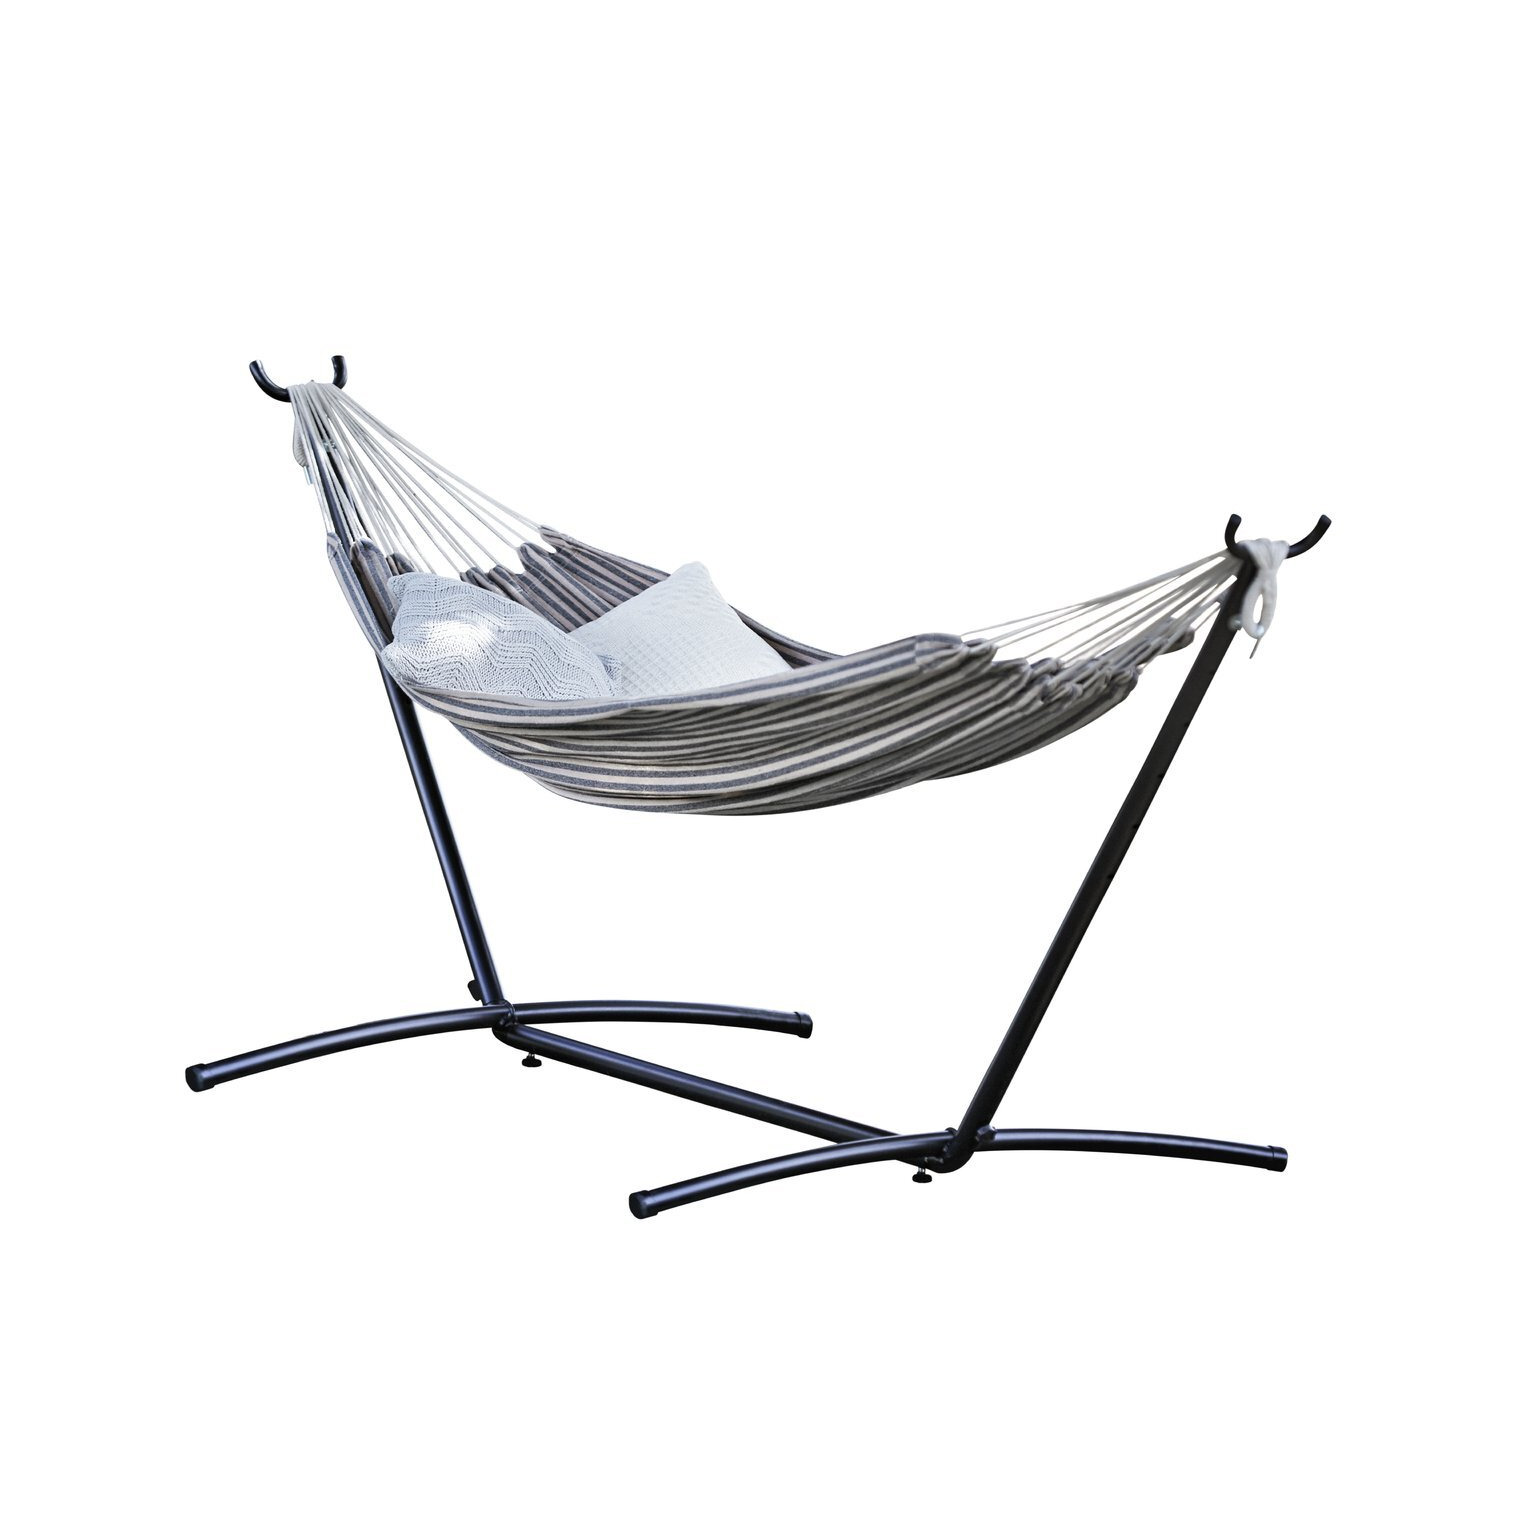 Argos Home Hammock with Metal Stand - White & Grey - image 1